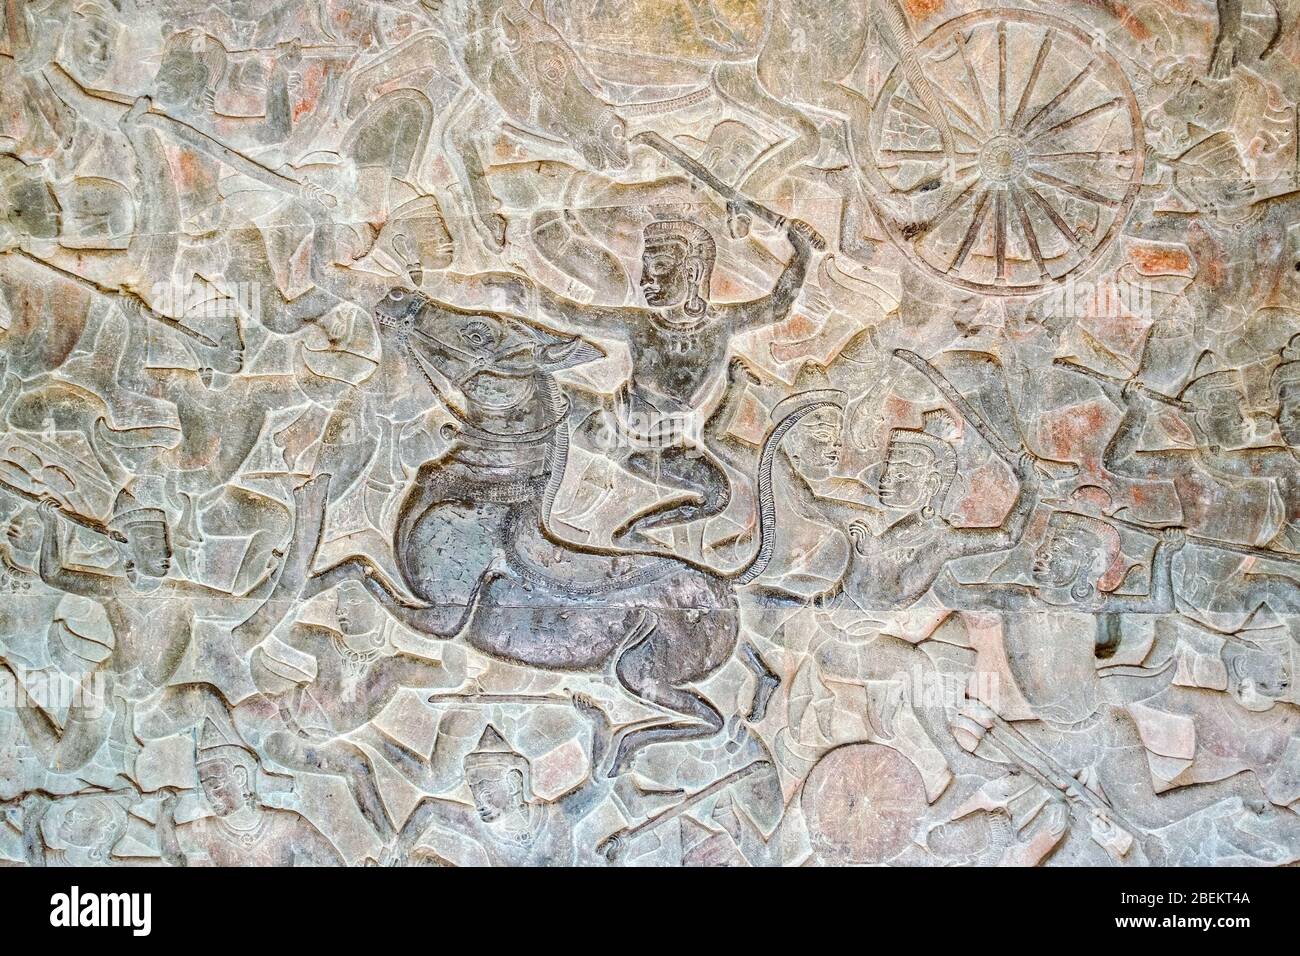 Reliefs commemorating a series of historical events from the reign of King Suryavarman II (12th century) in Angkor Wat, Siem Reap, Cambodia Stock Photo